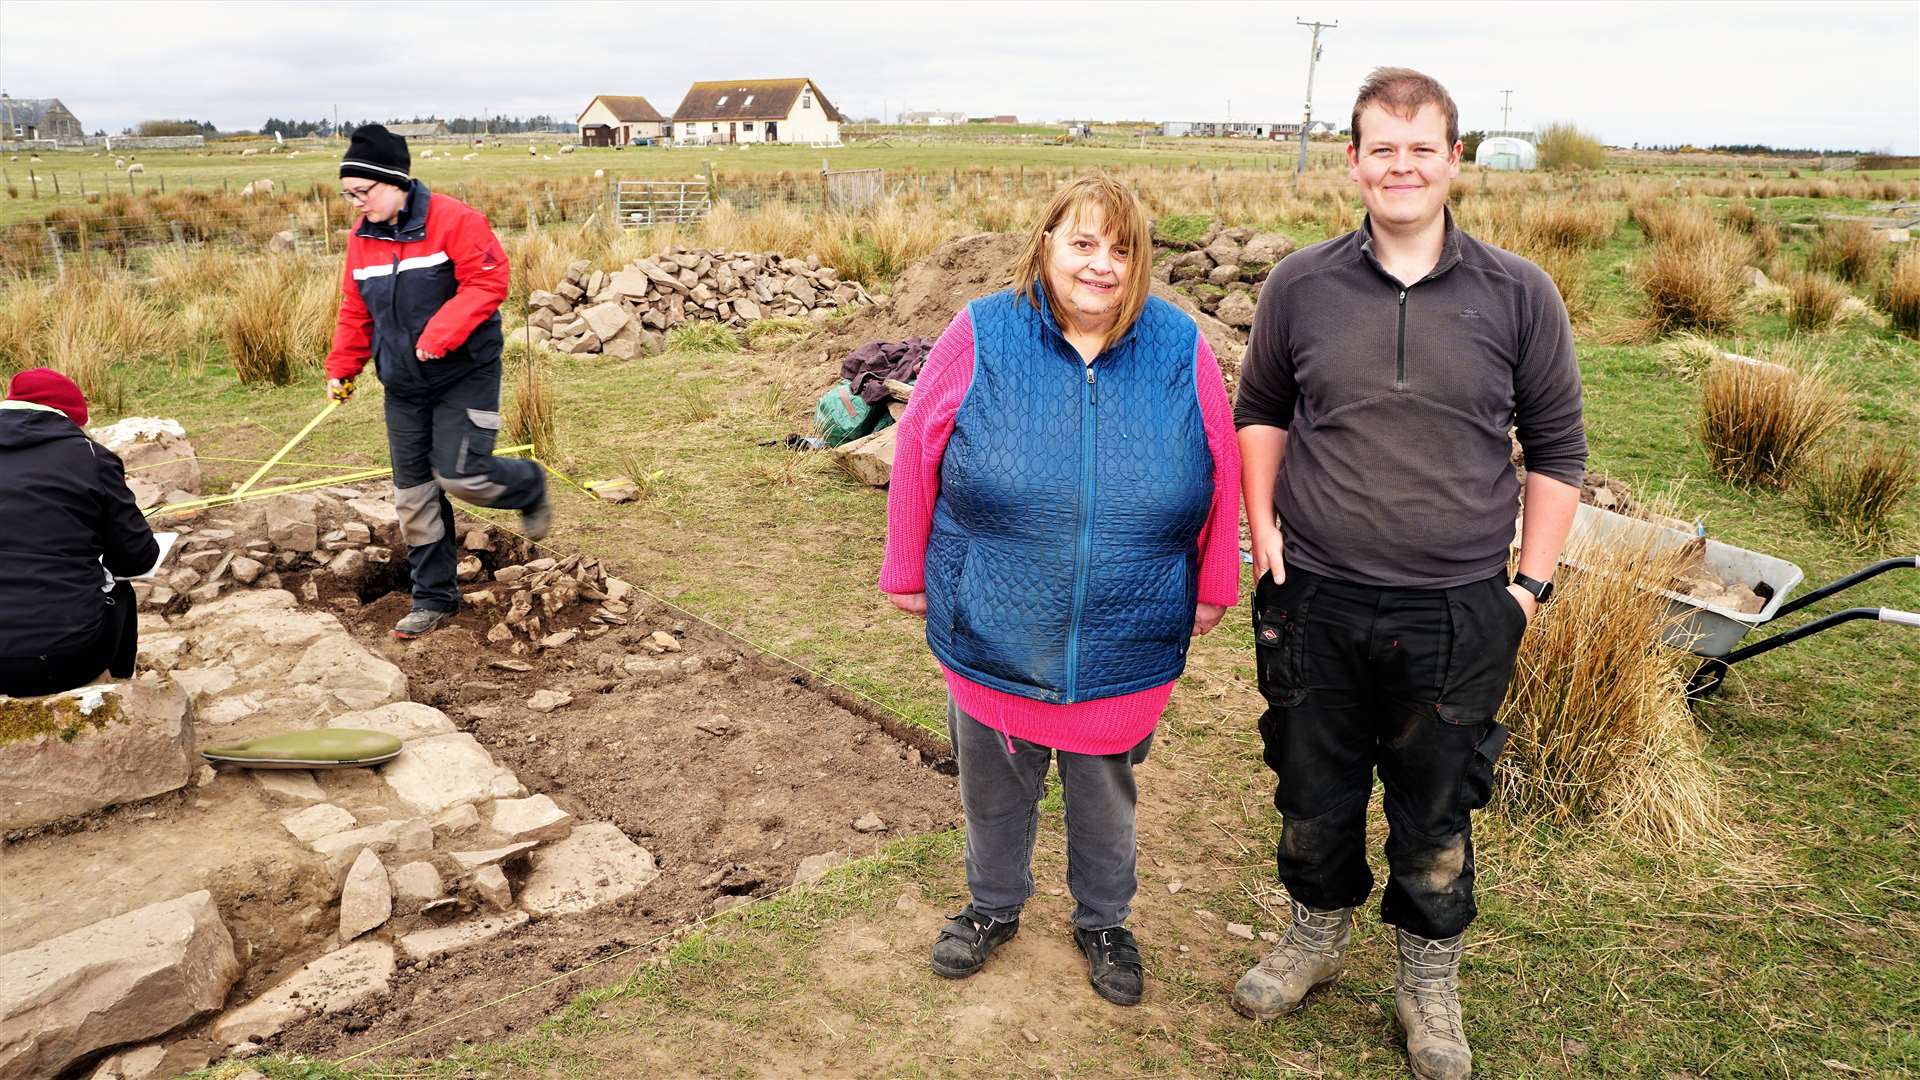 Heather Stewart with Stuart Munro from AOC Archaeology. Heather lives close by and her son Peter gave permission for the dig to take place. Picture: DGS